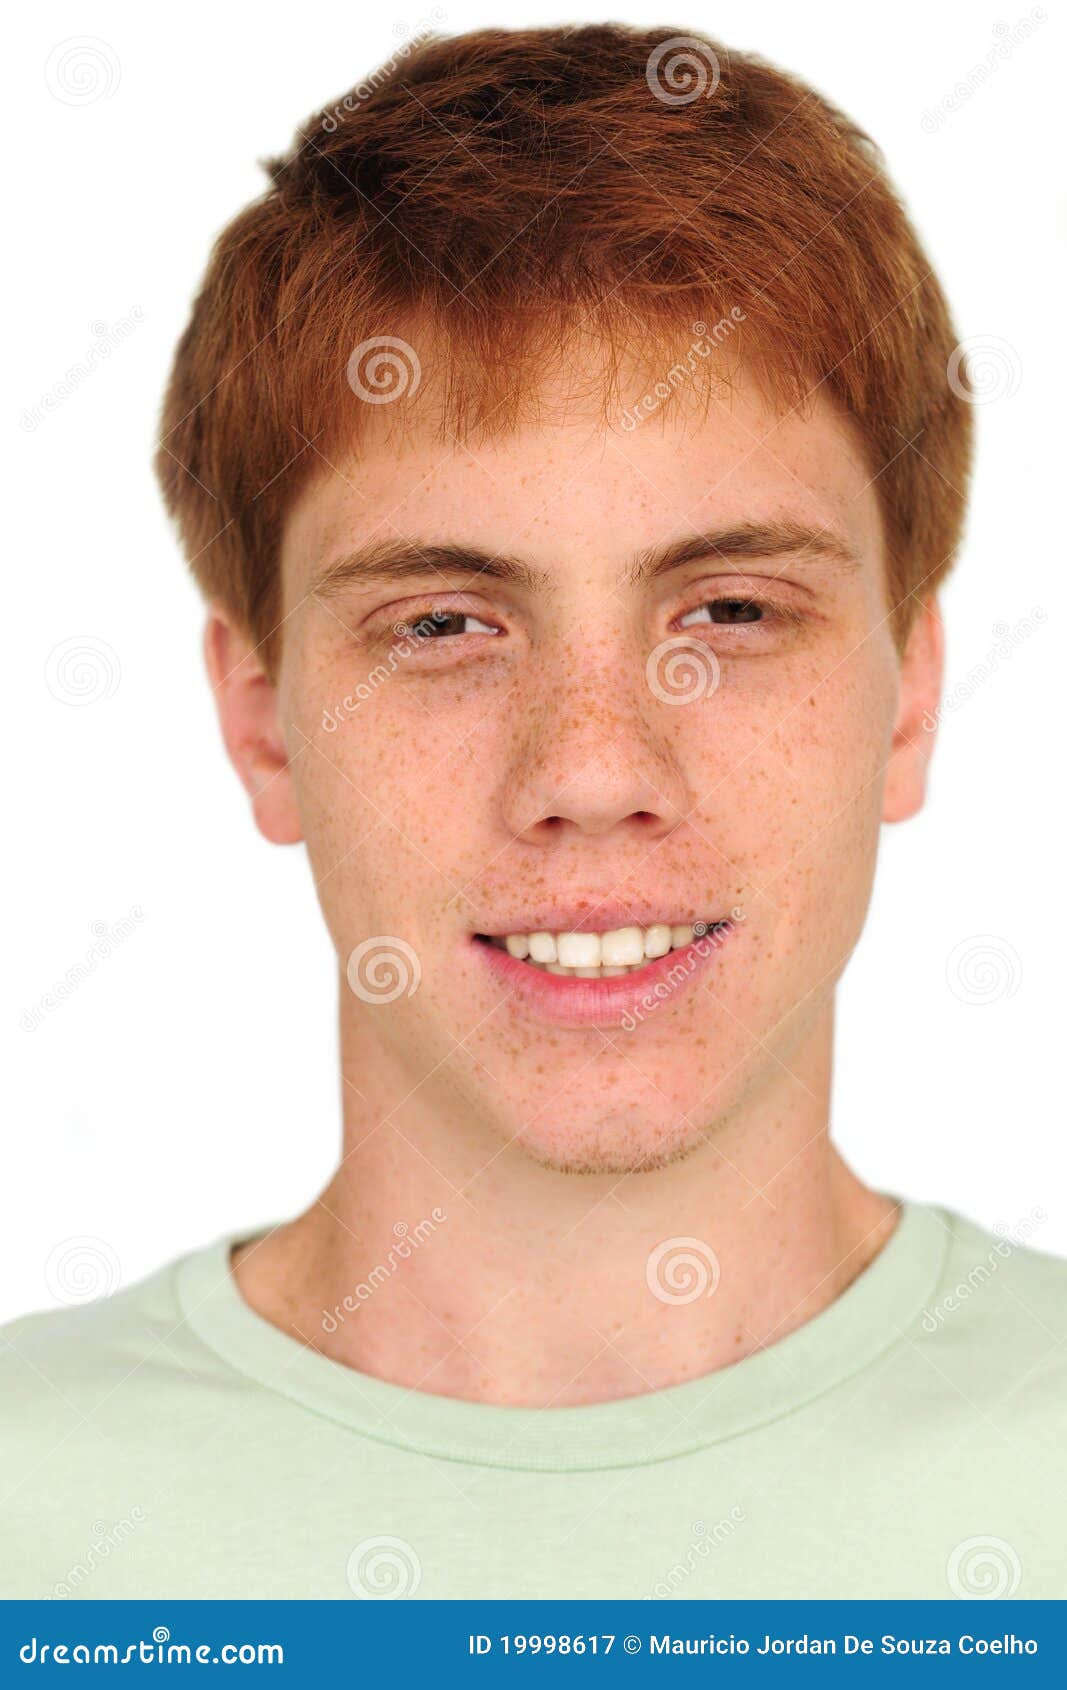 young man with freckles